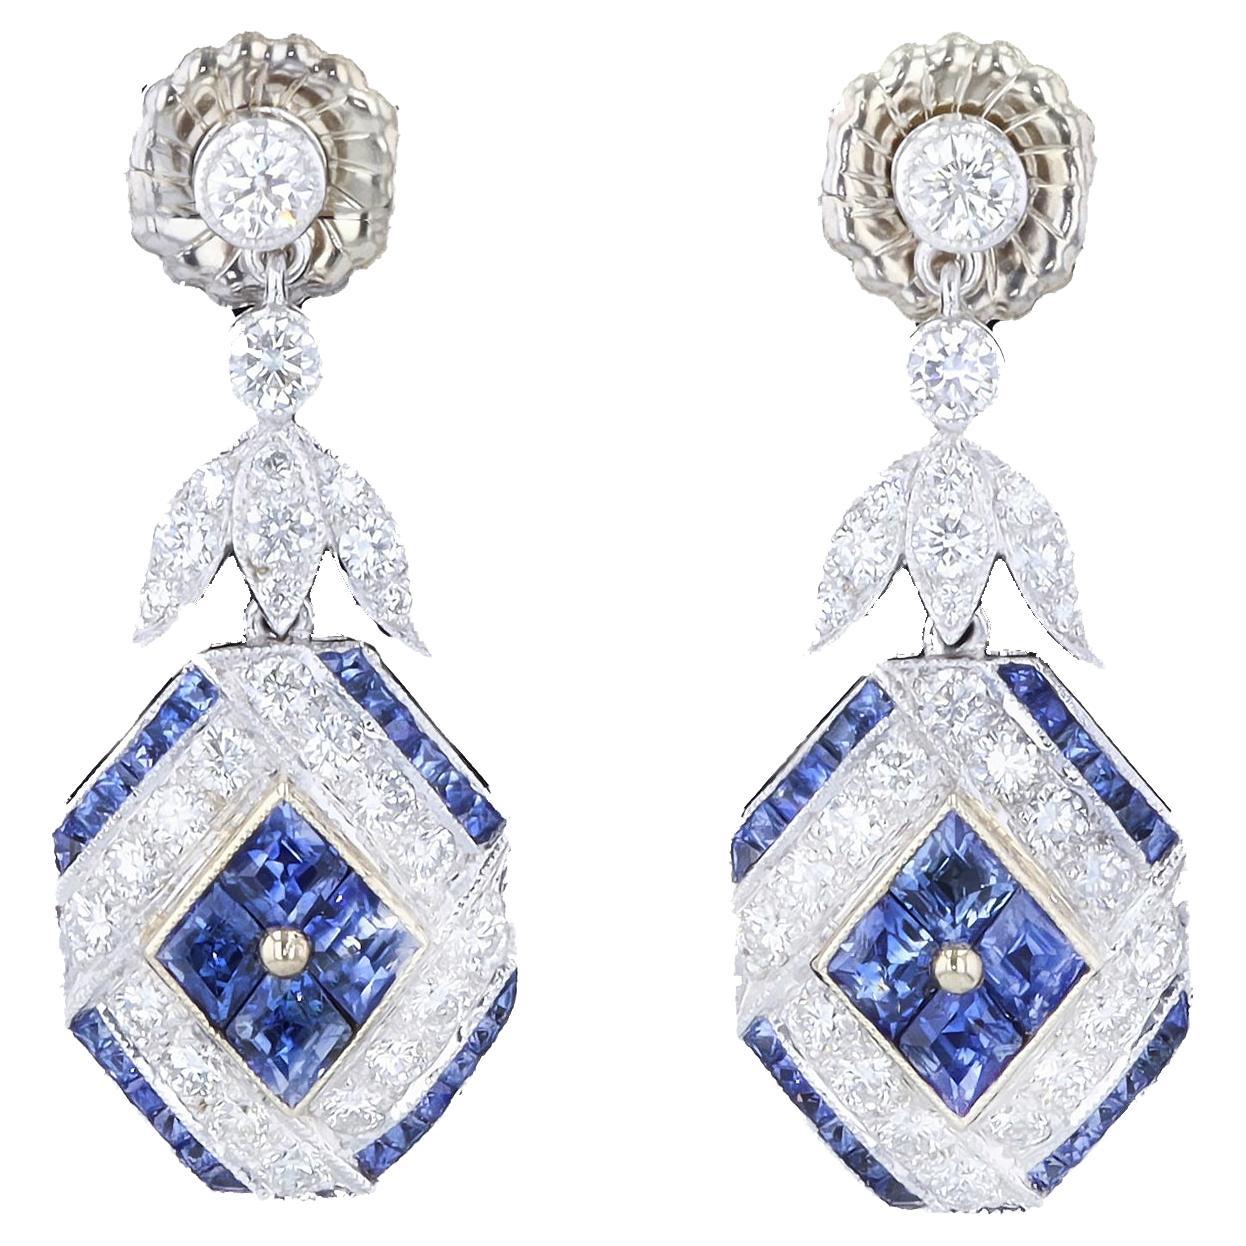 18K White and Yellow Gold Diamond Earrings with French Cut Sapphires